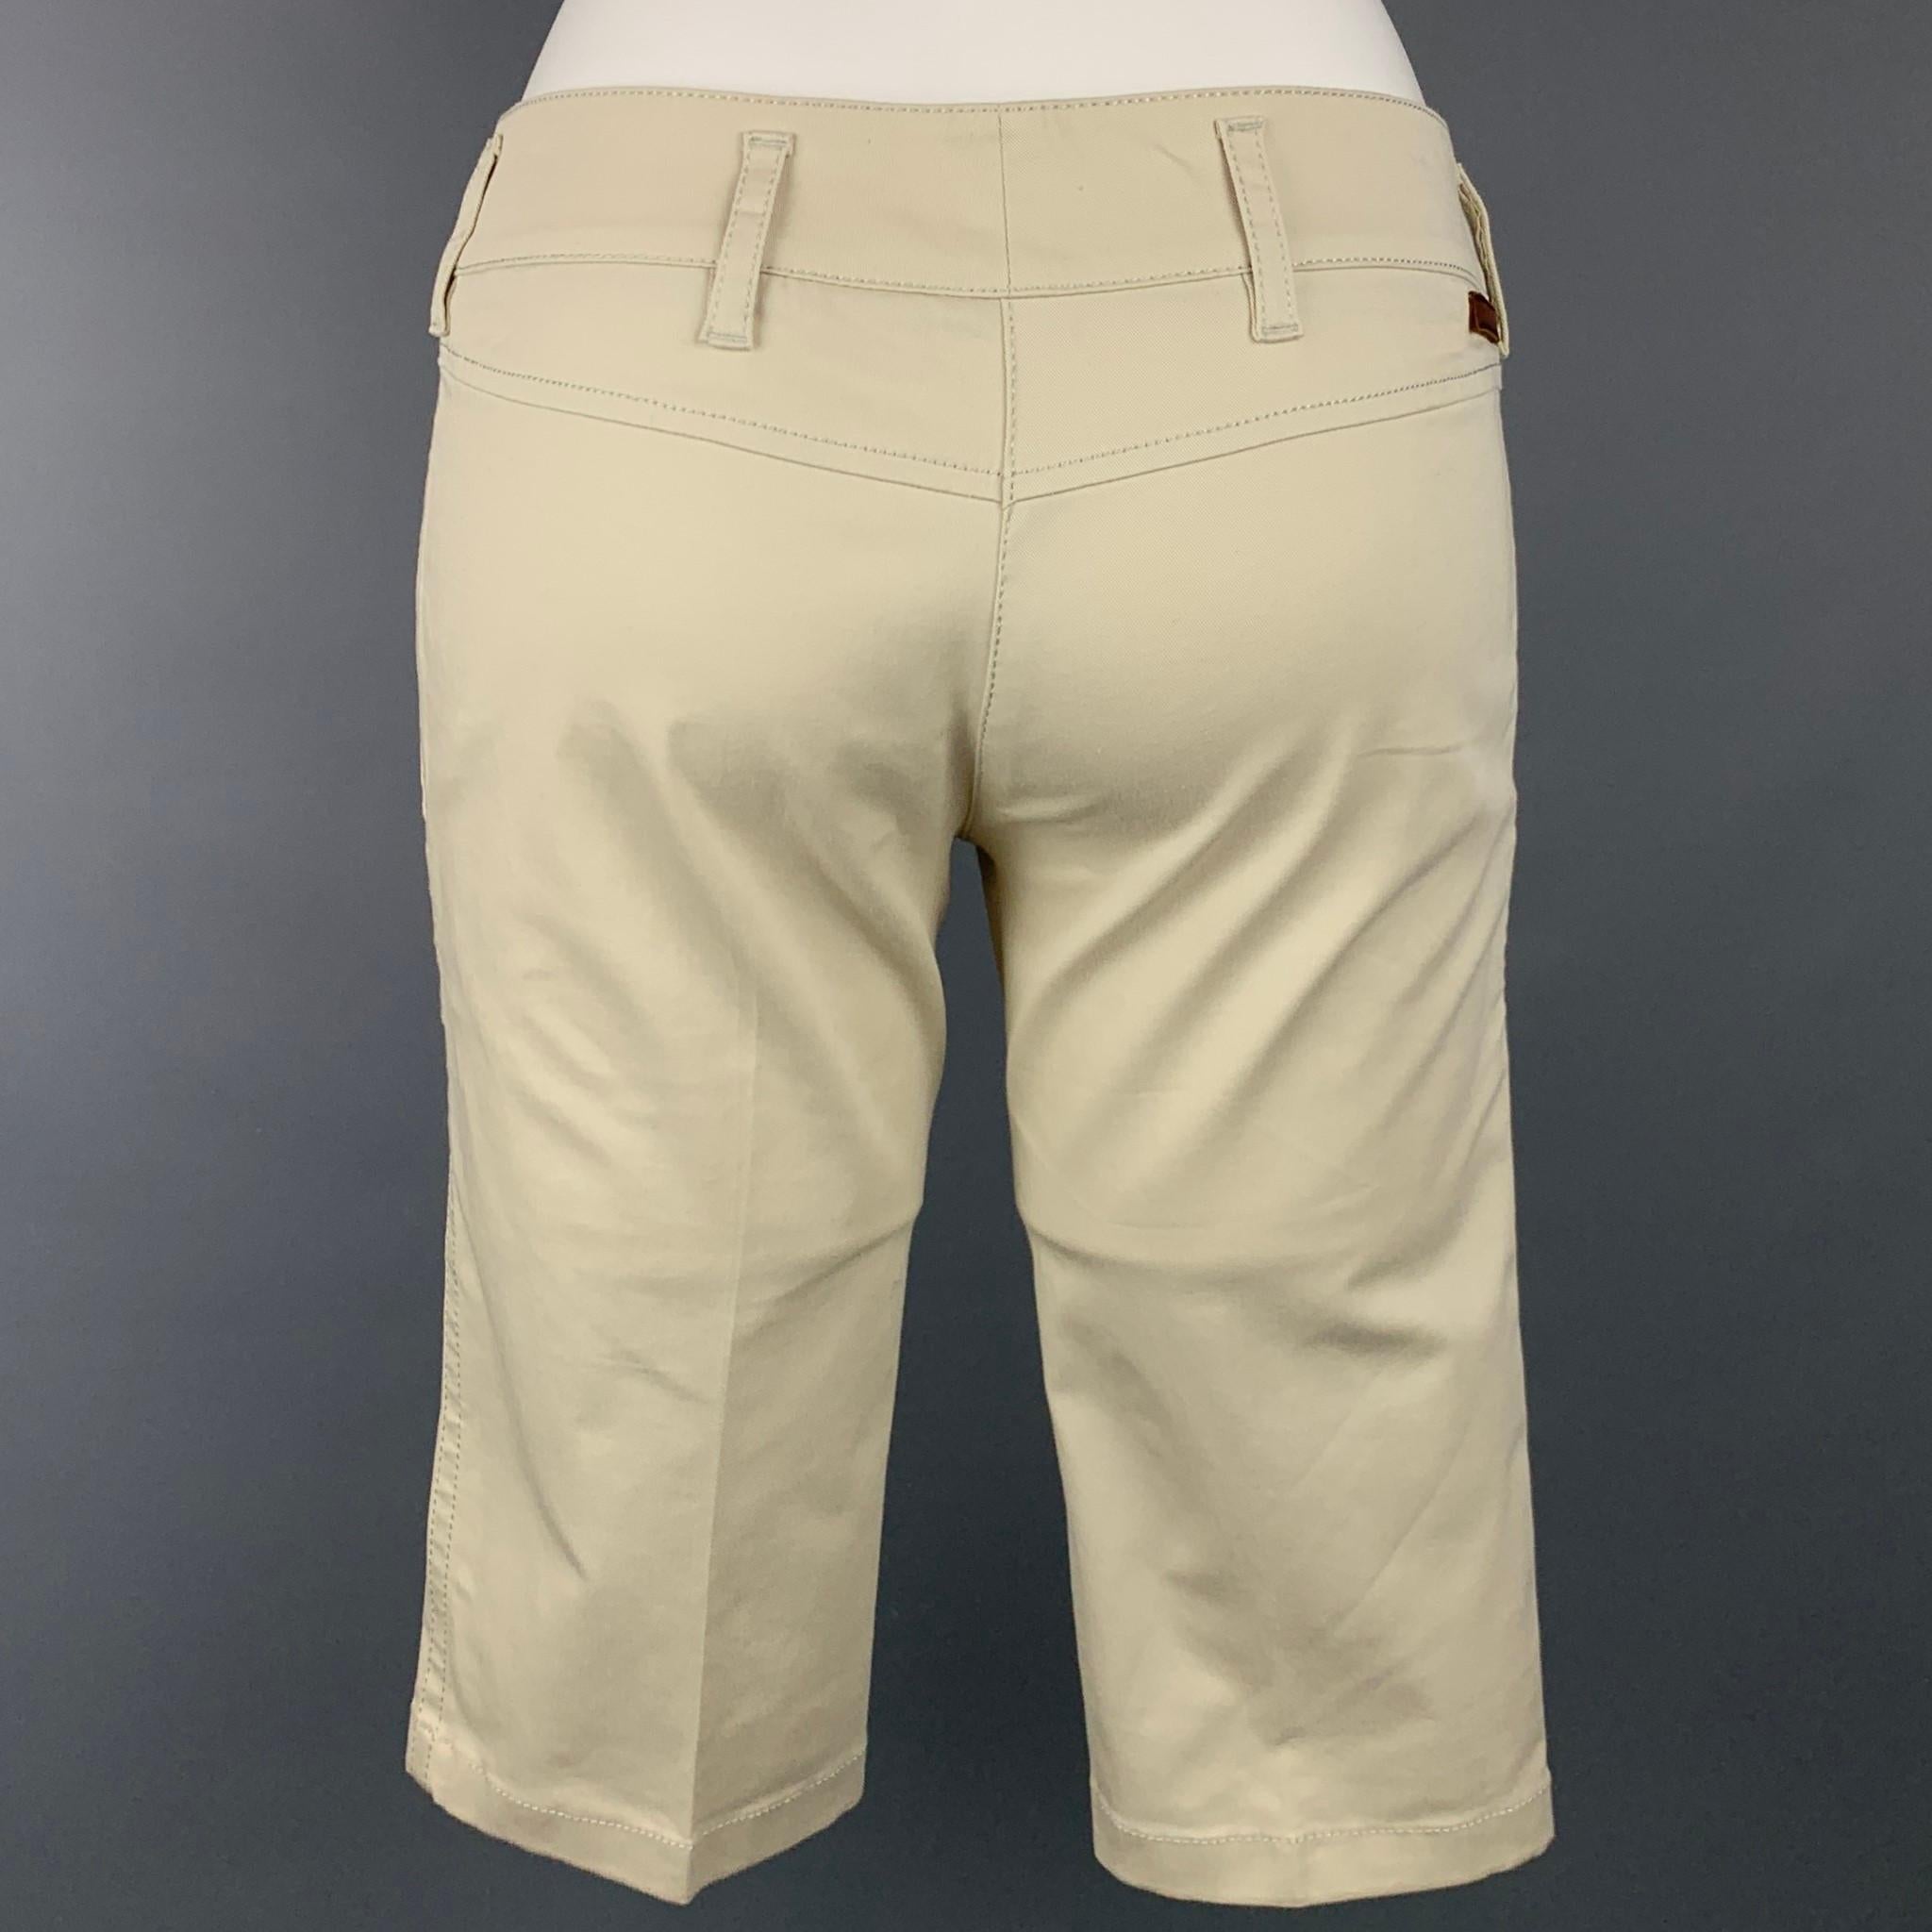 PRADA shorts comes in a beige cotton featuring a bermuda style, slit pockets, zip fly, and a double front tab closure.

Very Good Pre-Owned Condition.
Marked: 38

Measurements:

Waist: 30 in.
Rise: 7.5 in.
Inseam: 14 in. 